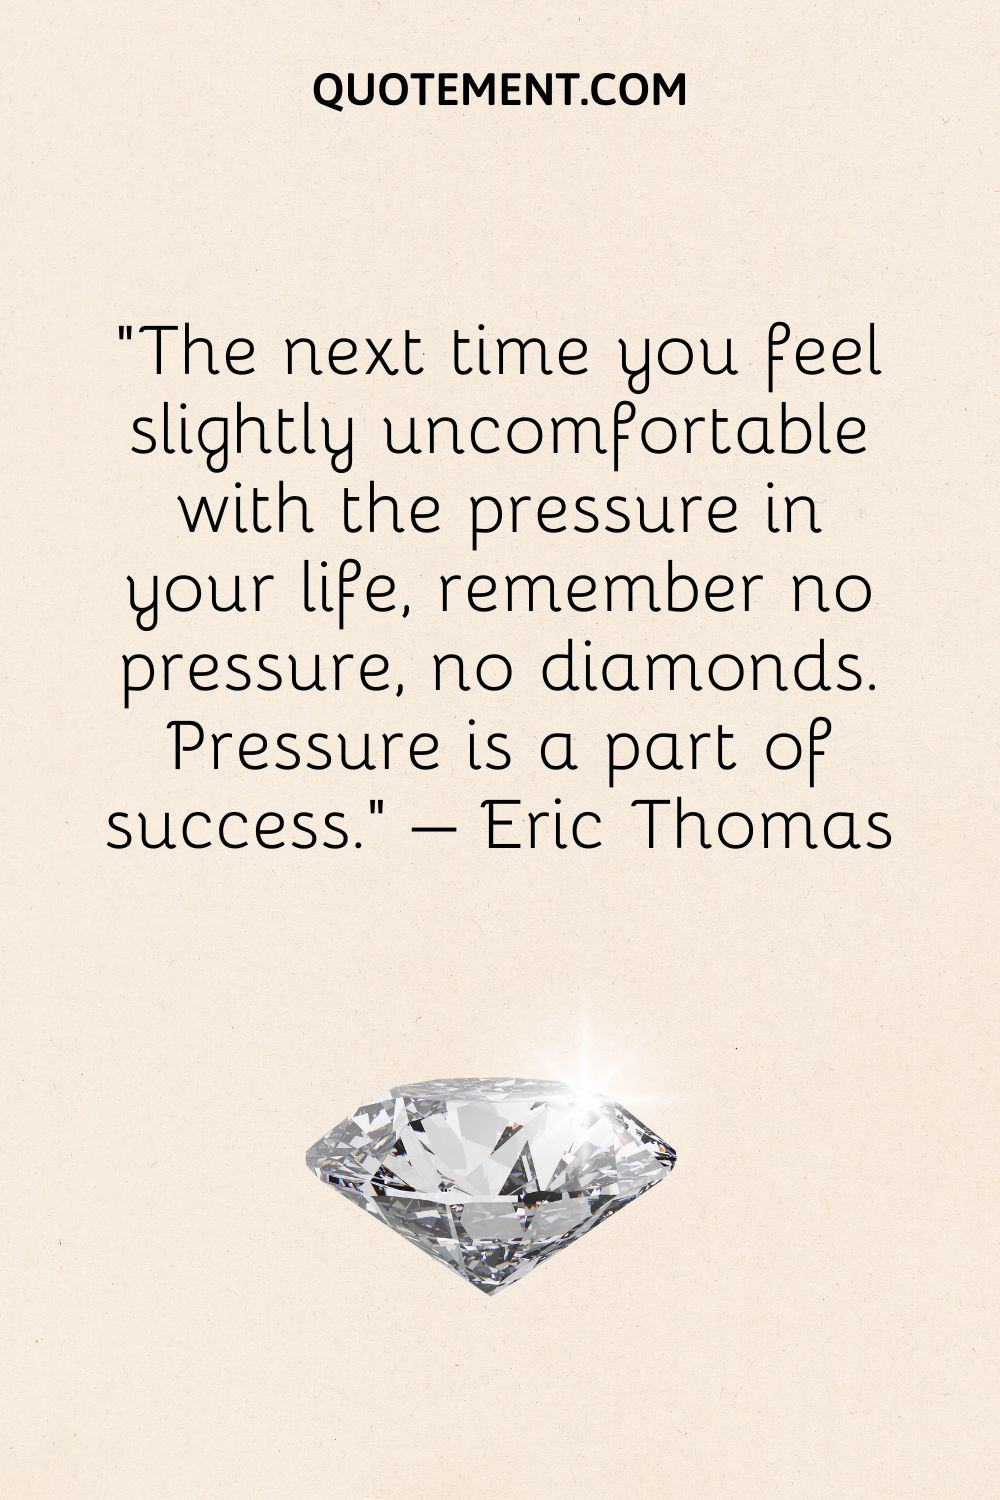 The next time you feel slightly uncomfortable with the pressure in your life, remember no pressure, no diamonds